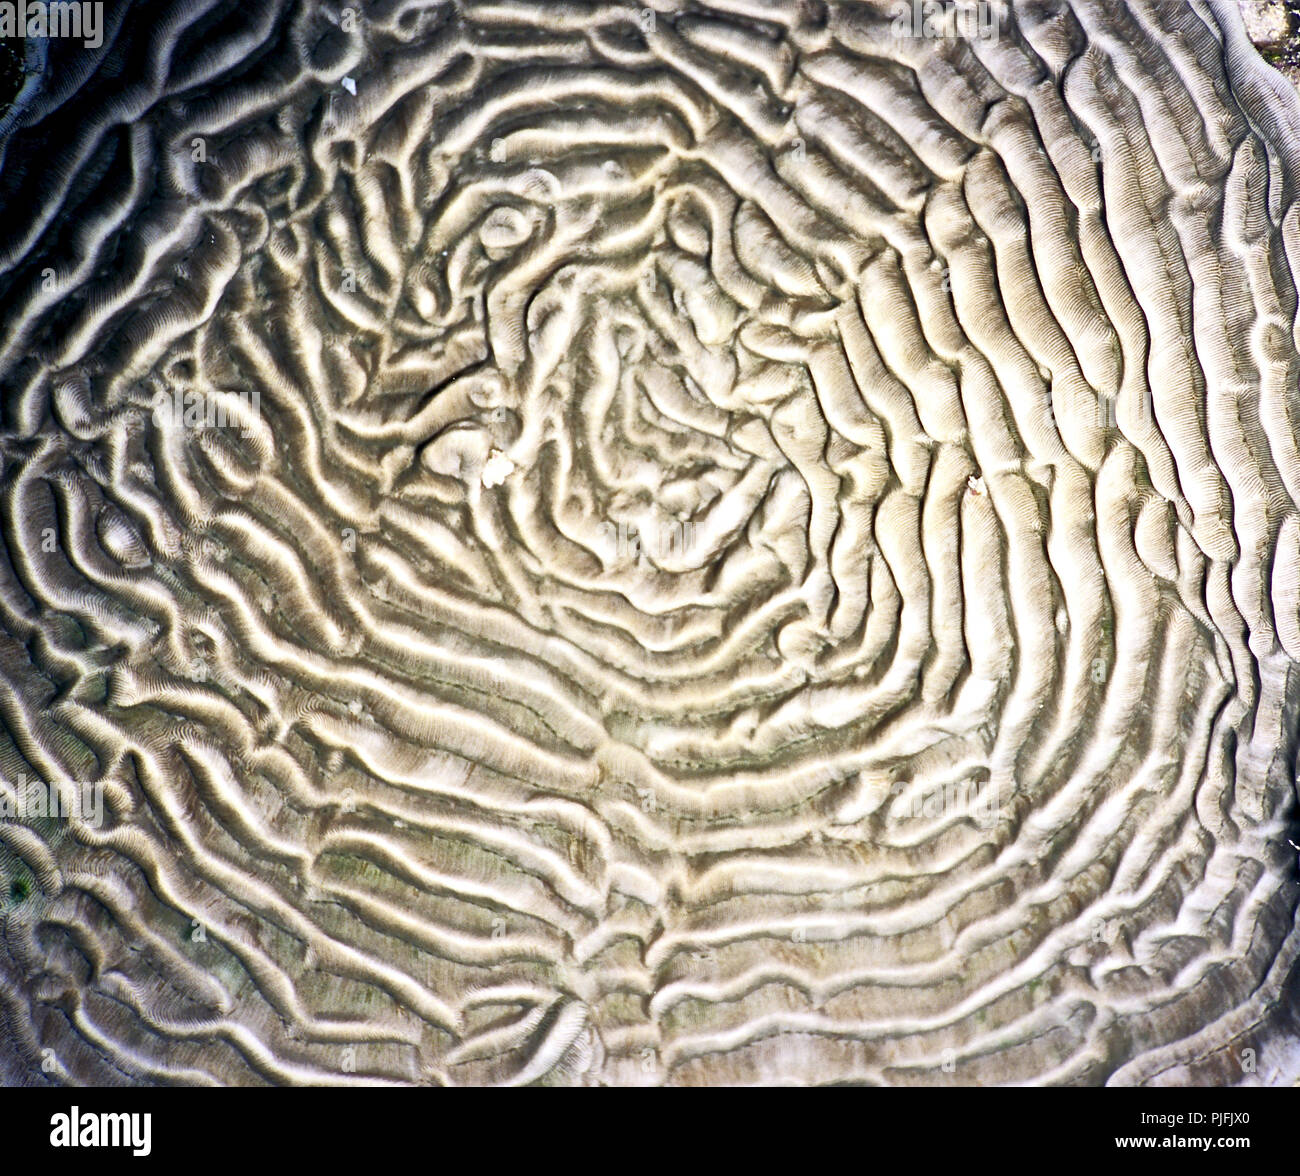 This is a species of hard coral (Platygyra lamellina: 100 cms.), which forms large round boulders - or flat plates as in this instance. The corallites are long and form maze-like sinuous lines, the appearance of which gives rise to its common name of brain coral. It has a widespread distribution in the Into-Pacific region, usually on the slopes of coral reefs and at depths not exceeding 20 metres.The species is becoming rarer, as a result of the general degradation of reefs due to climate change and ocean acidification. The IUCN Red List indicates that it is near threatened.  Egyptian Red Sea. Stock Photo